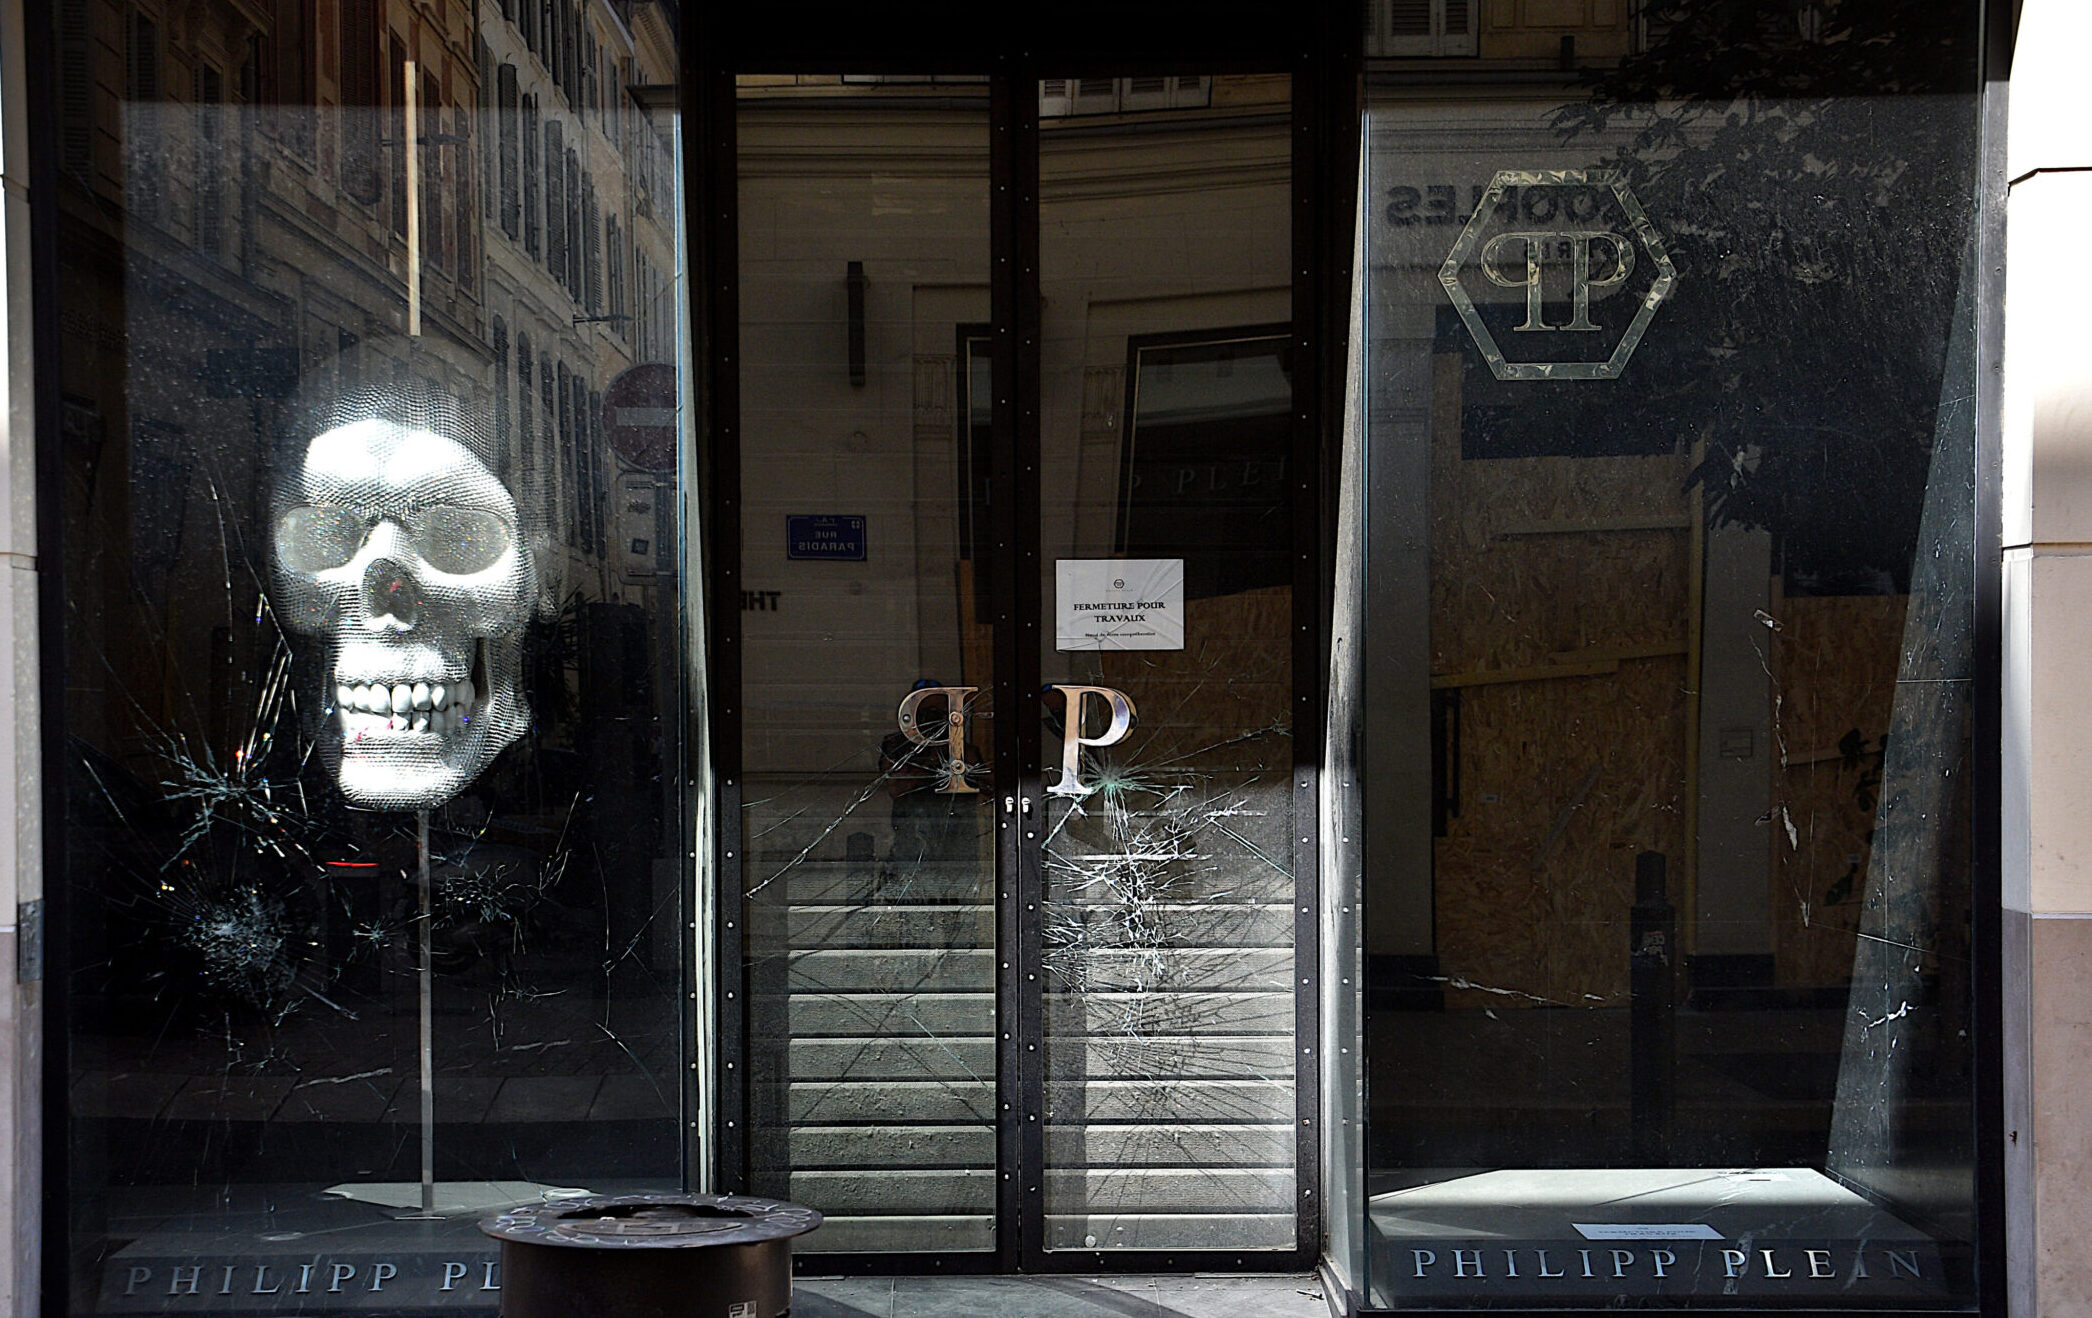 Shop windows damaged by rioters in Marseille